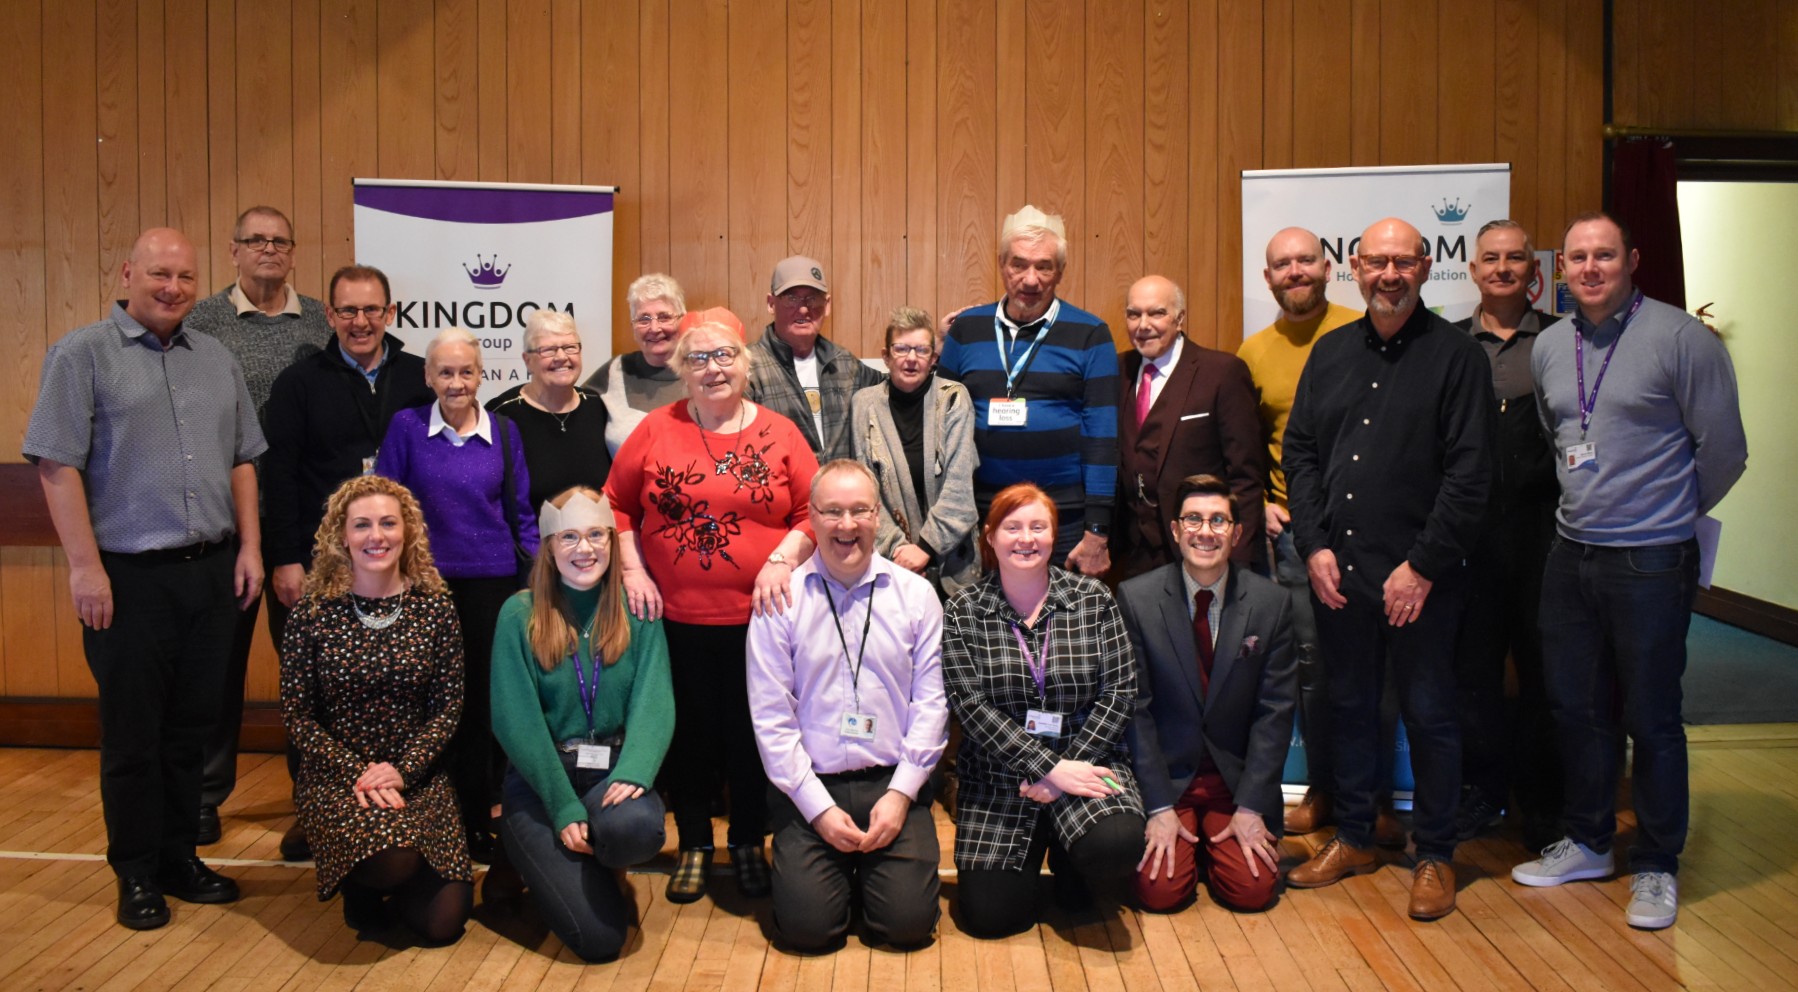 Kingdom and Ore Valley tenants ‘work together’ at Winter Gathering